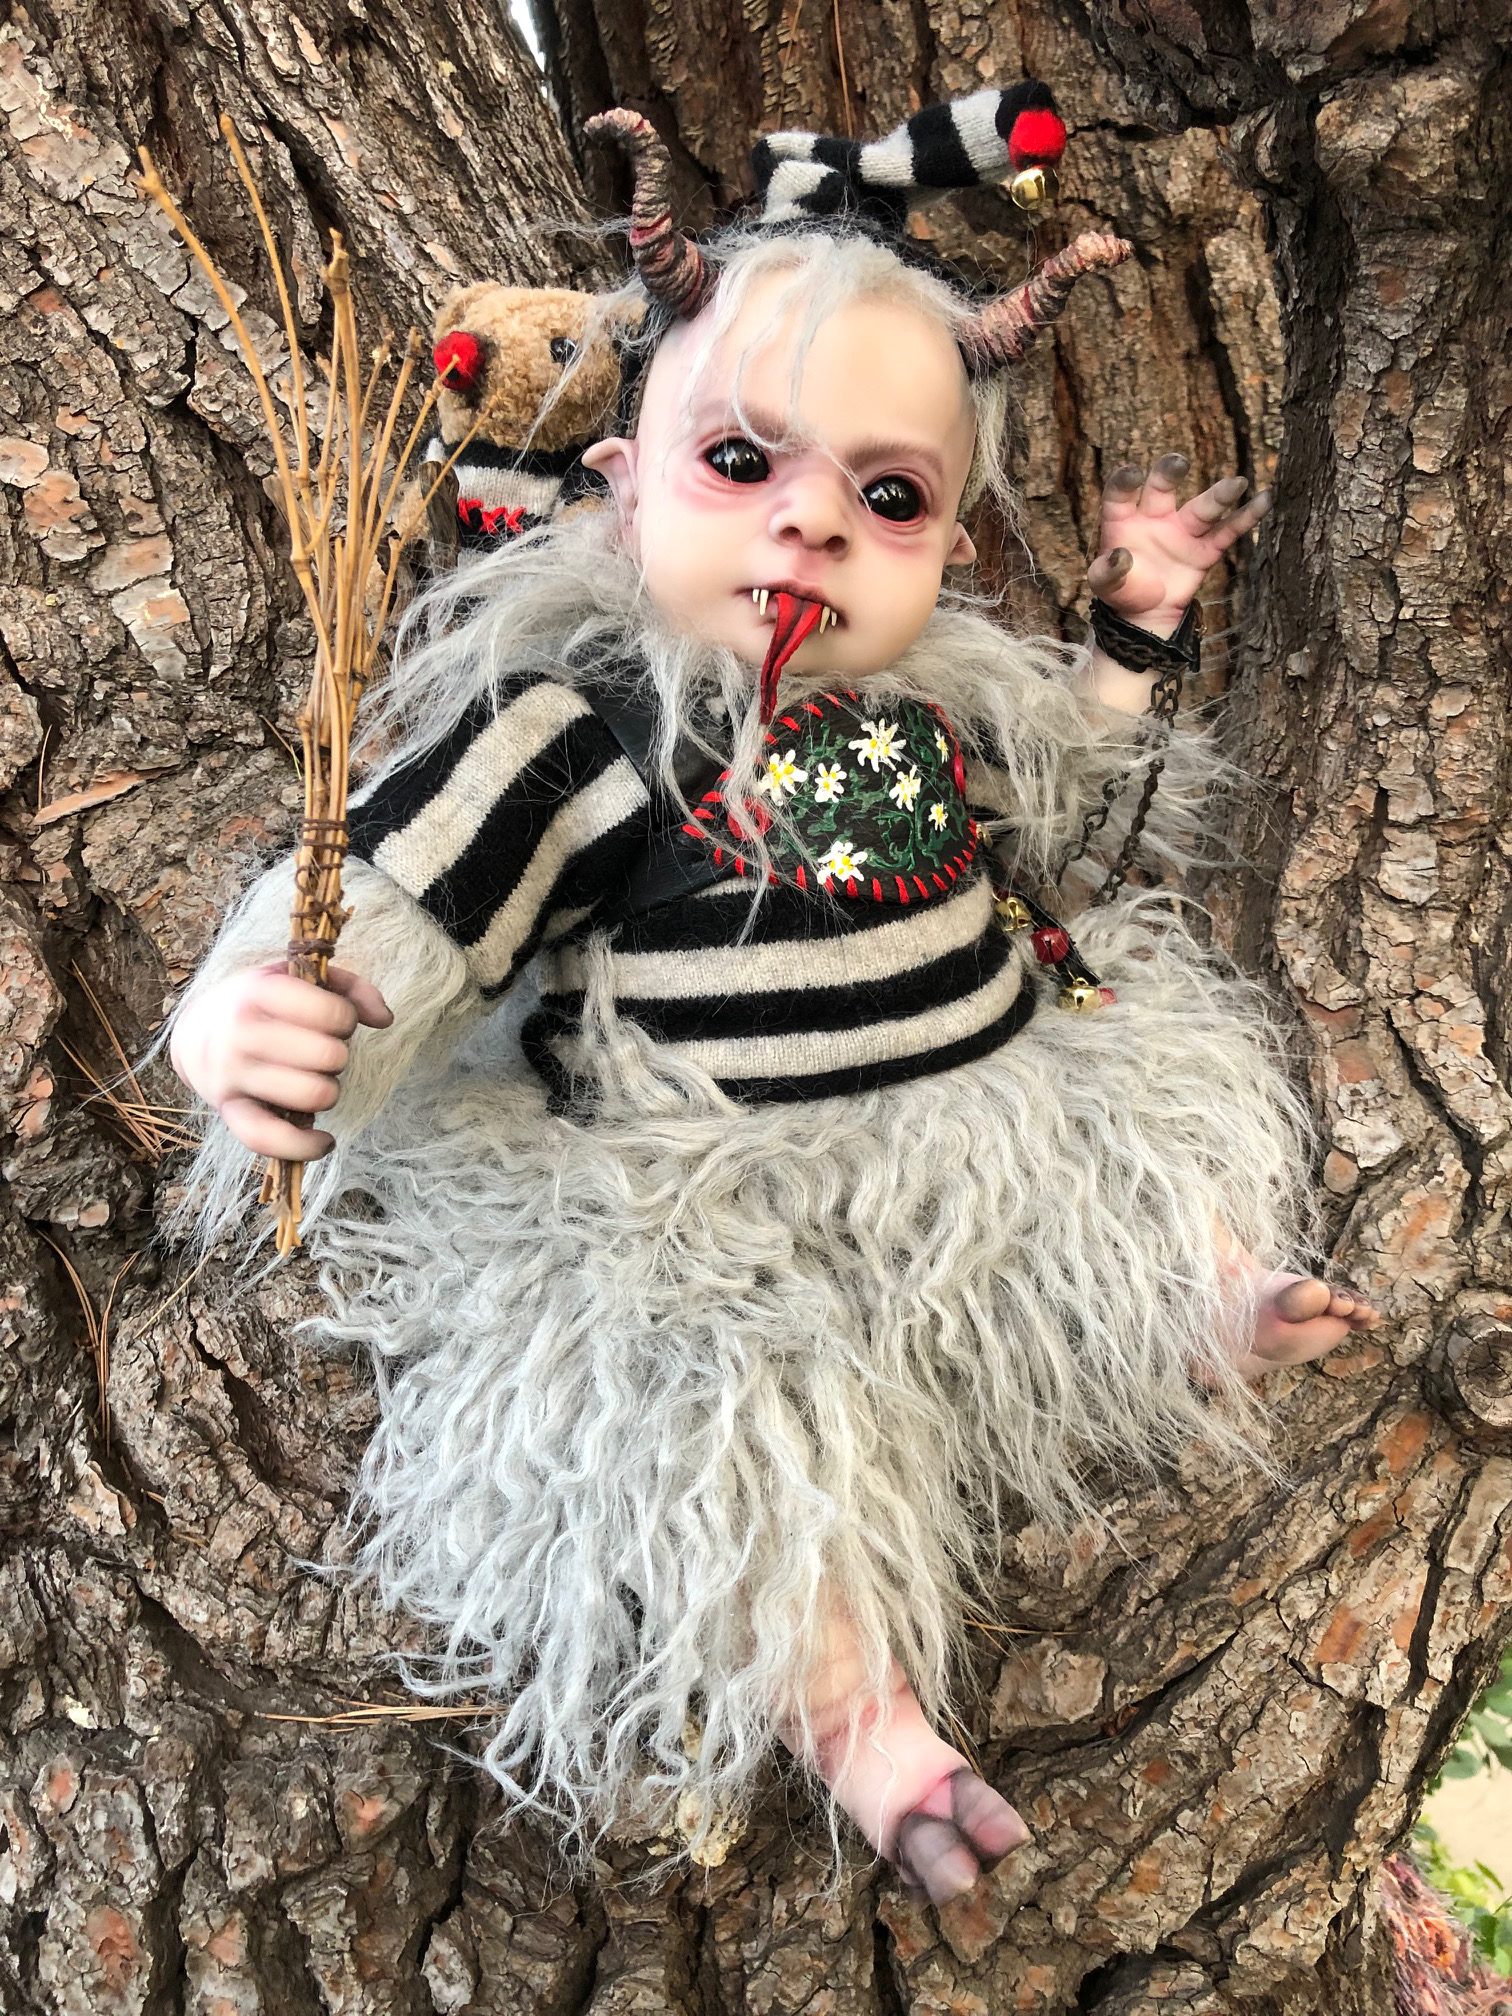 mixed media artdoll creepy evil babydoll elf with horns, black eyeballs, pointed elf ears, tongue sticks out, faux fur collar, striped cap and sweater, cloven hoof foot, curly tail, faux fur legs and teddy bear on his back